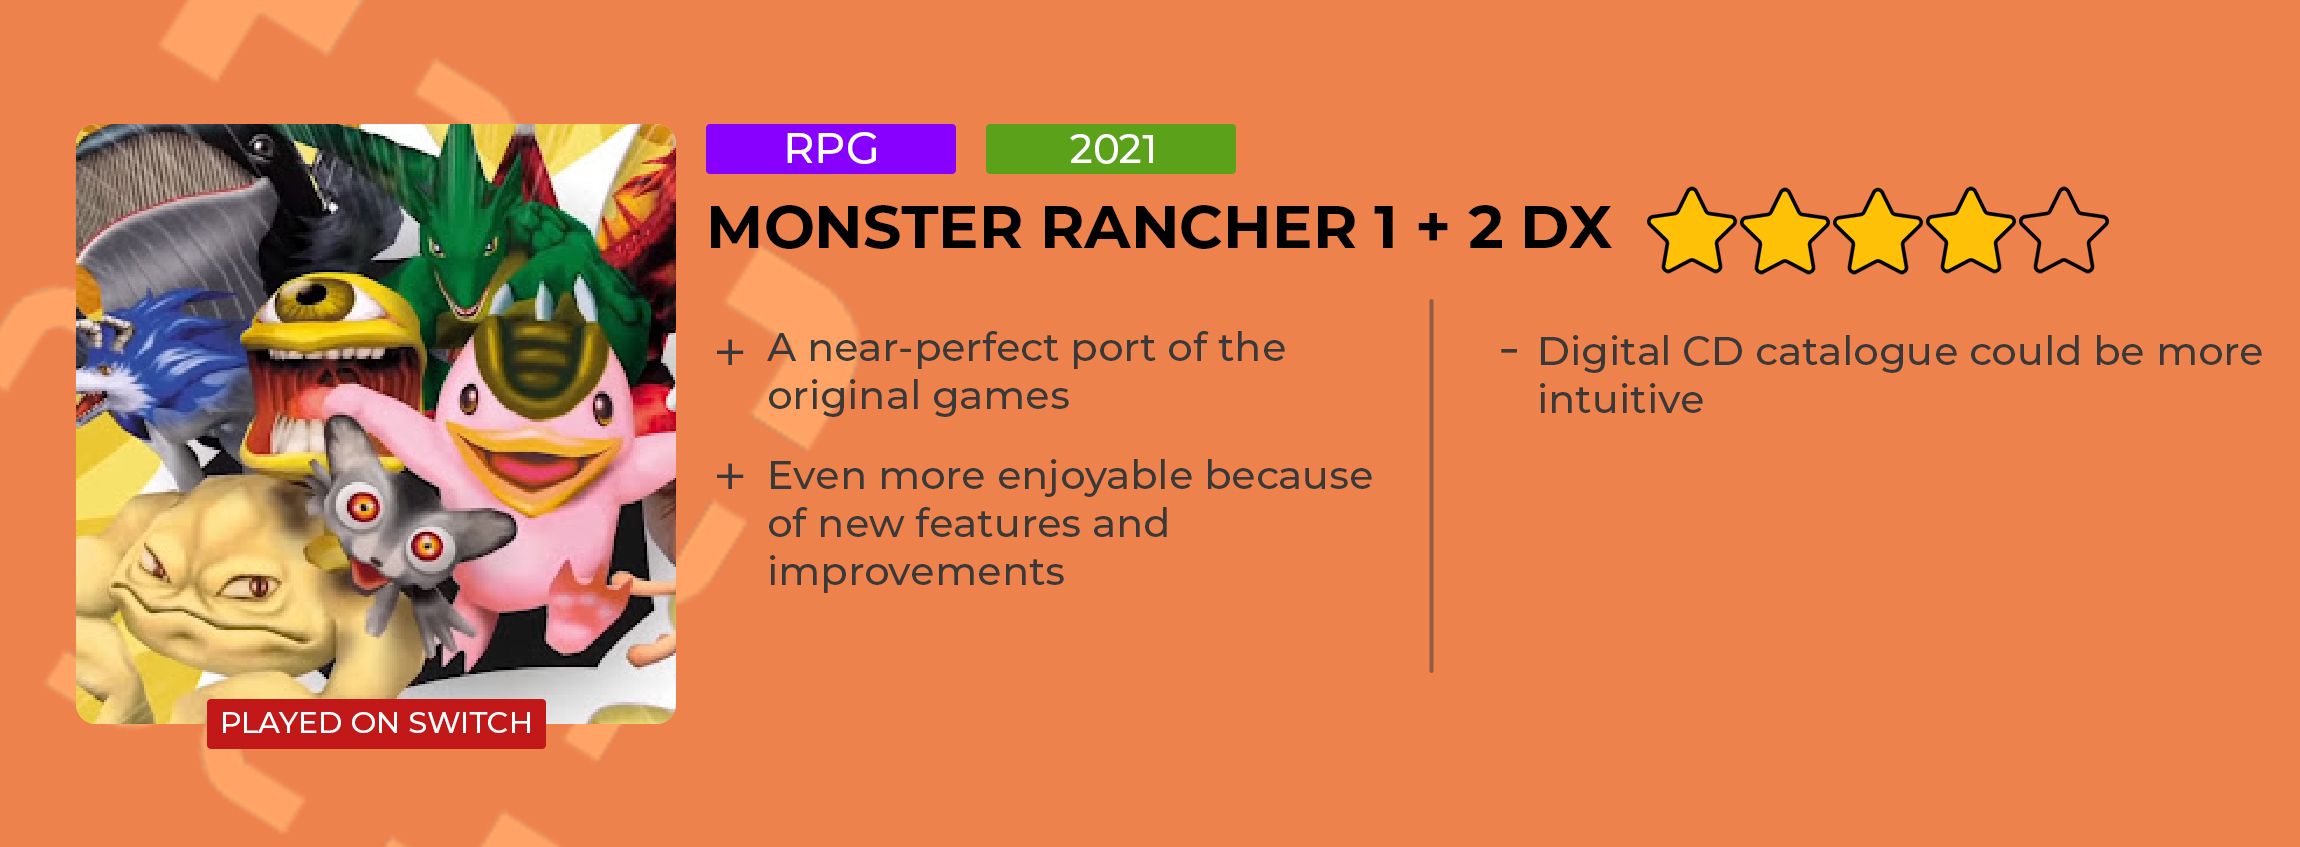 Monster Rancher 1 & 2 DX review card